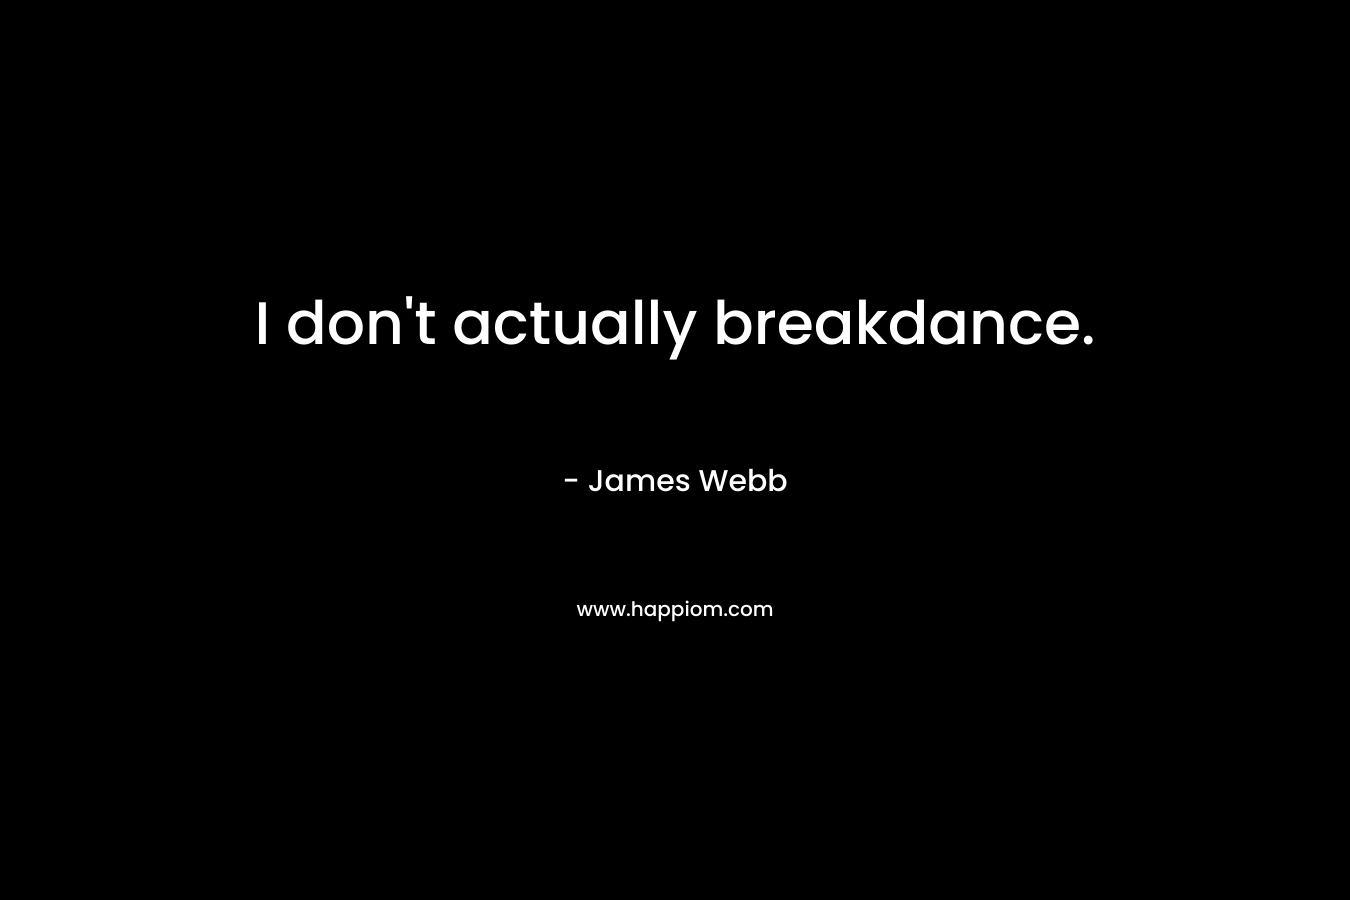 I don't actually breakdance.